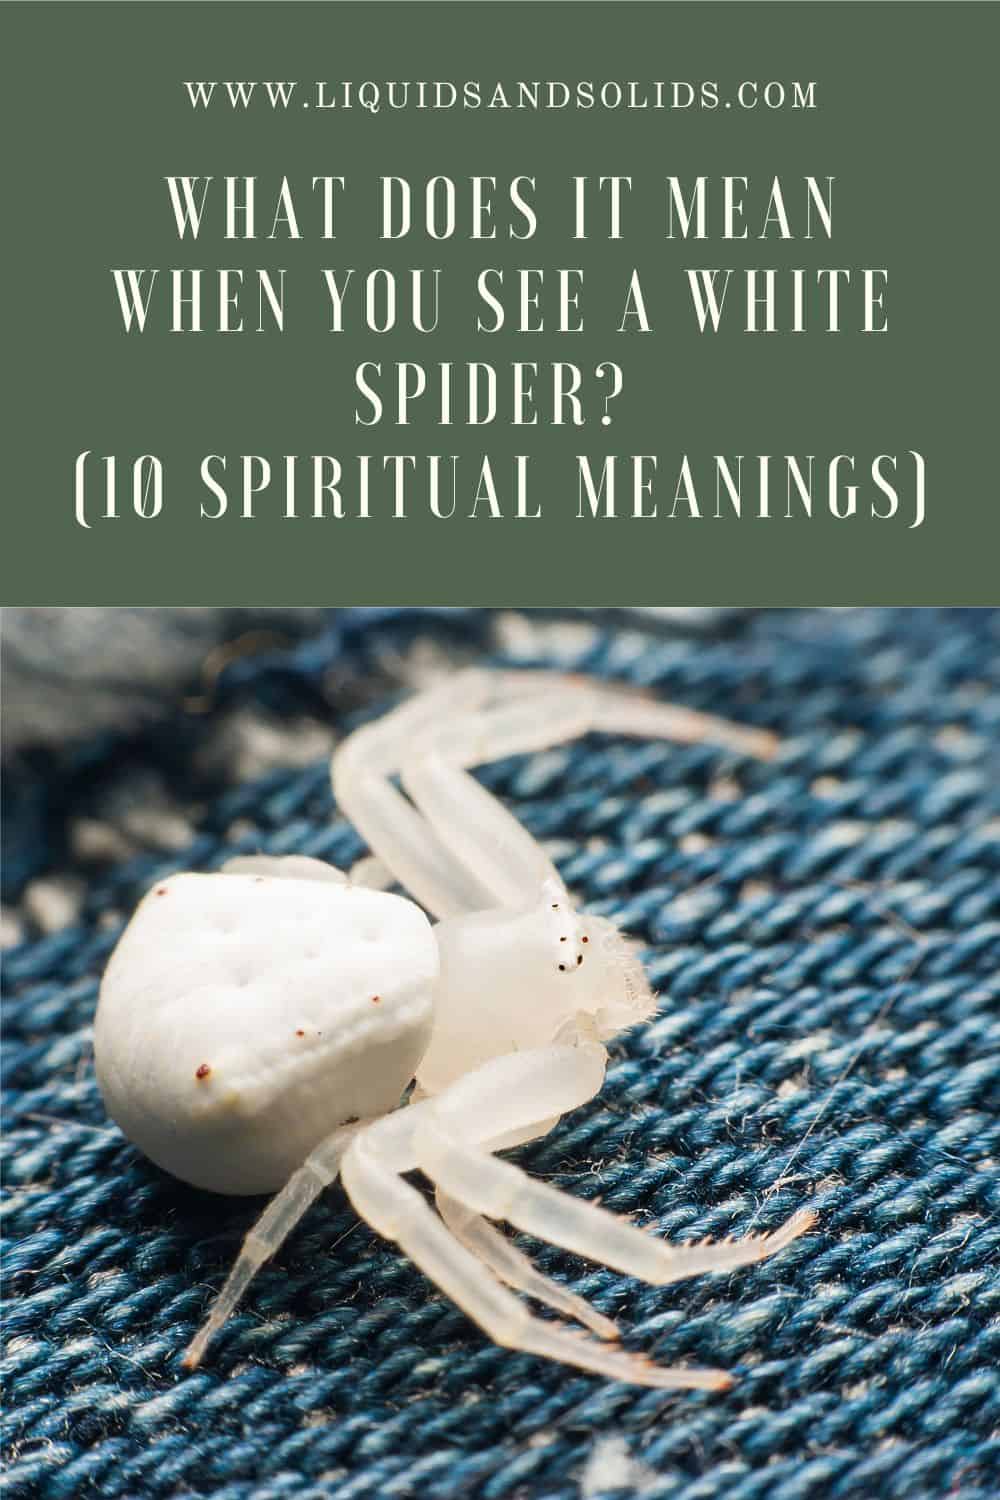 What Does It Mean When You See A White Spider? (10 Spiritual Meanings)